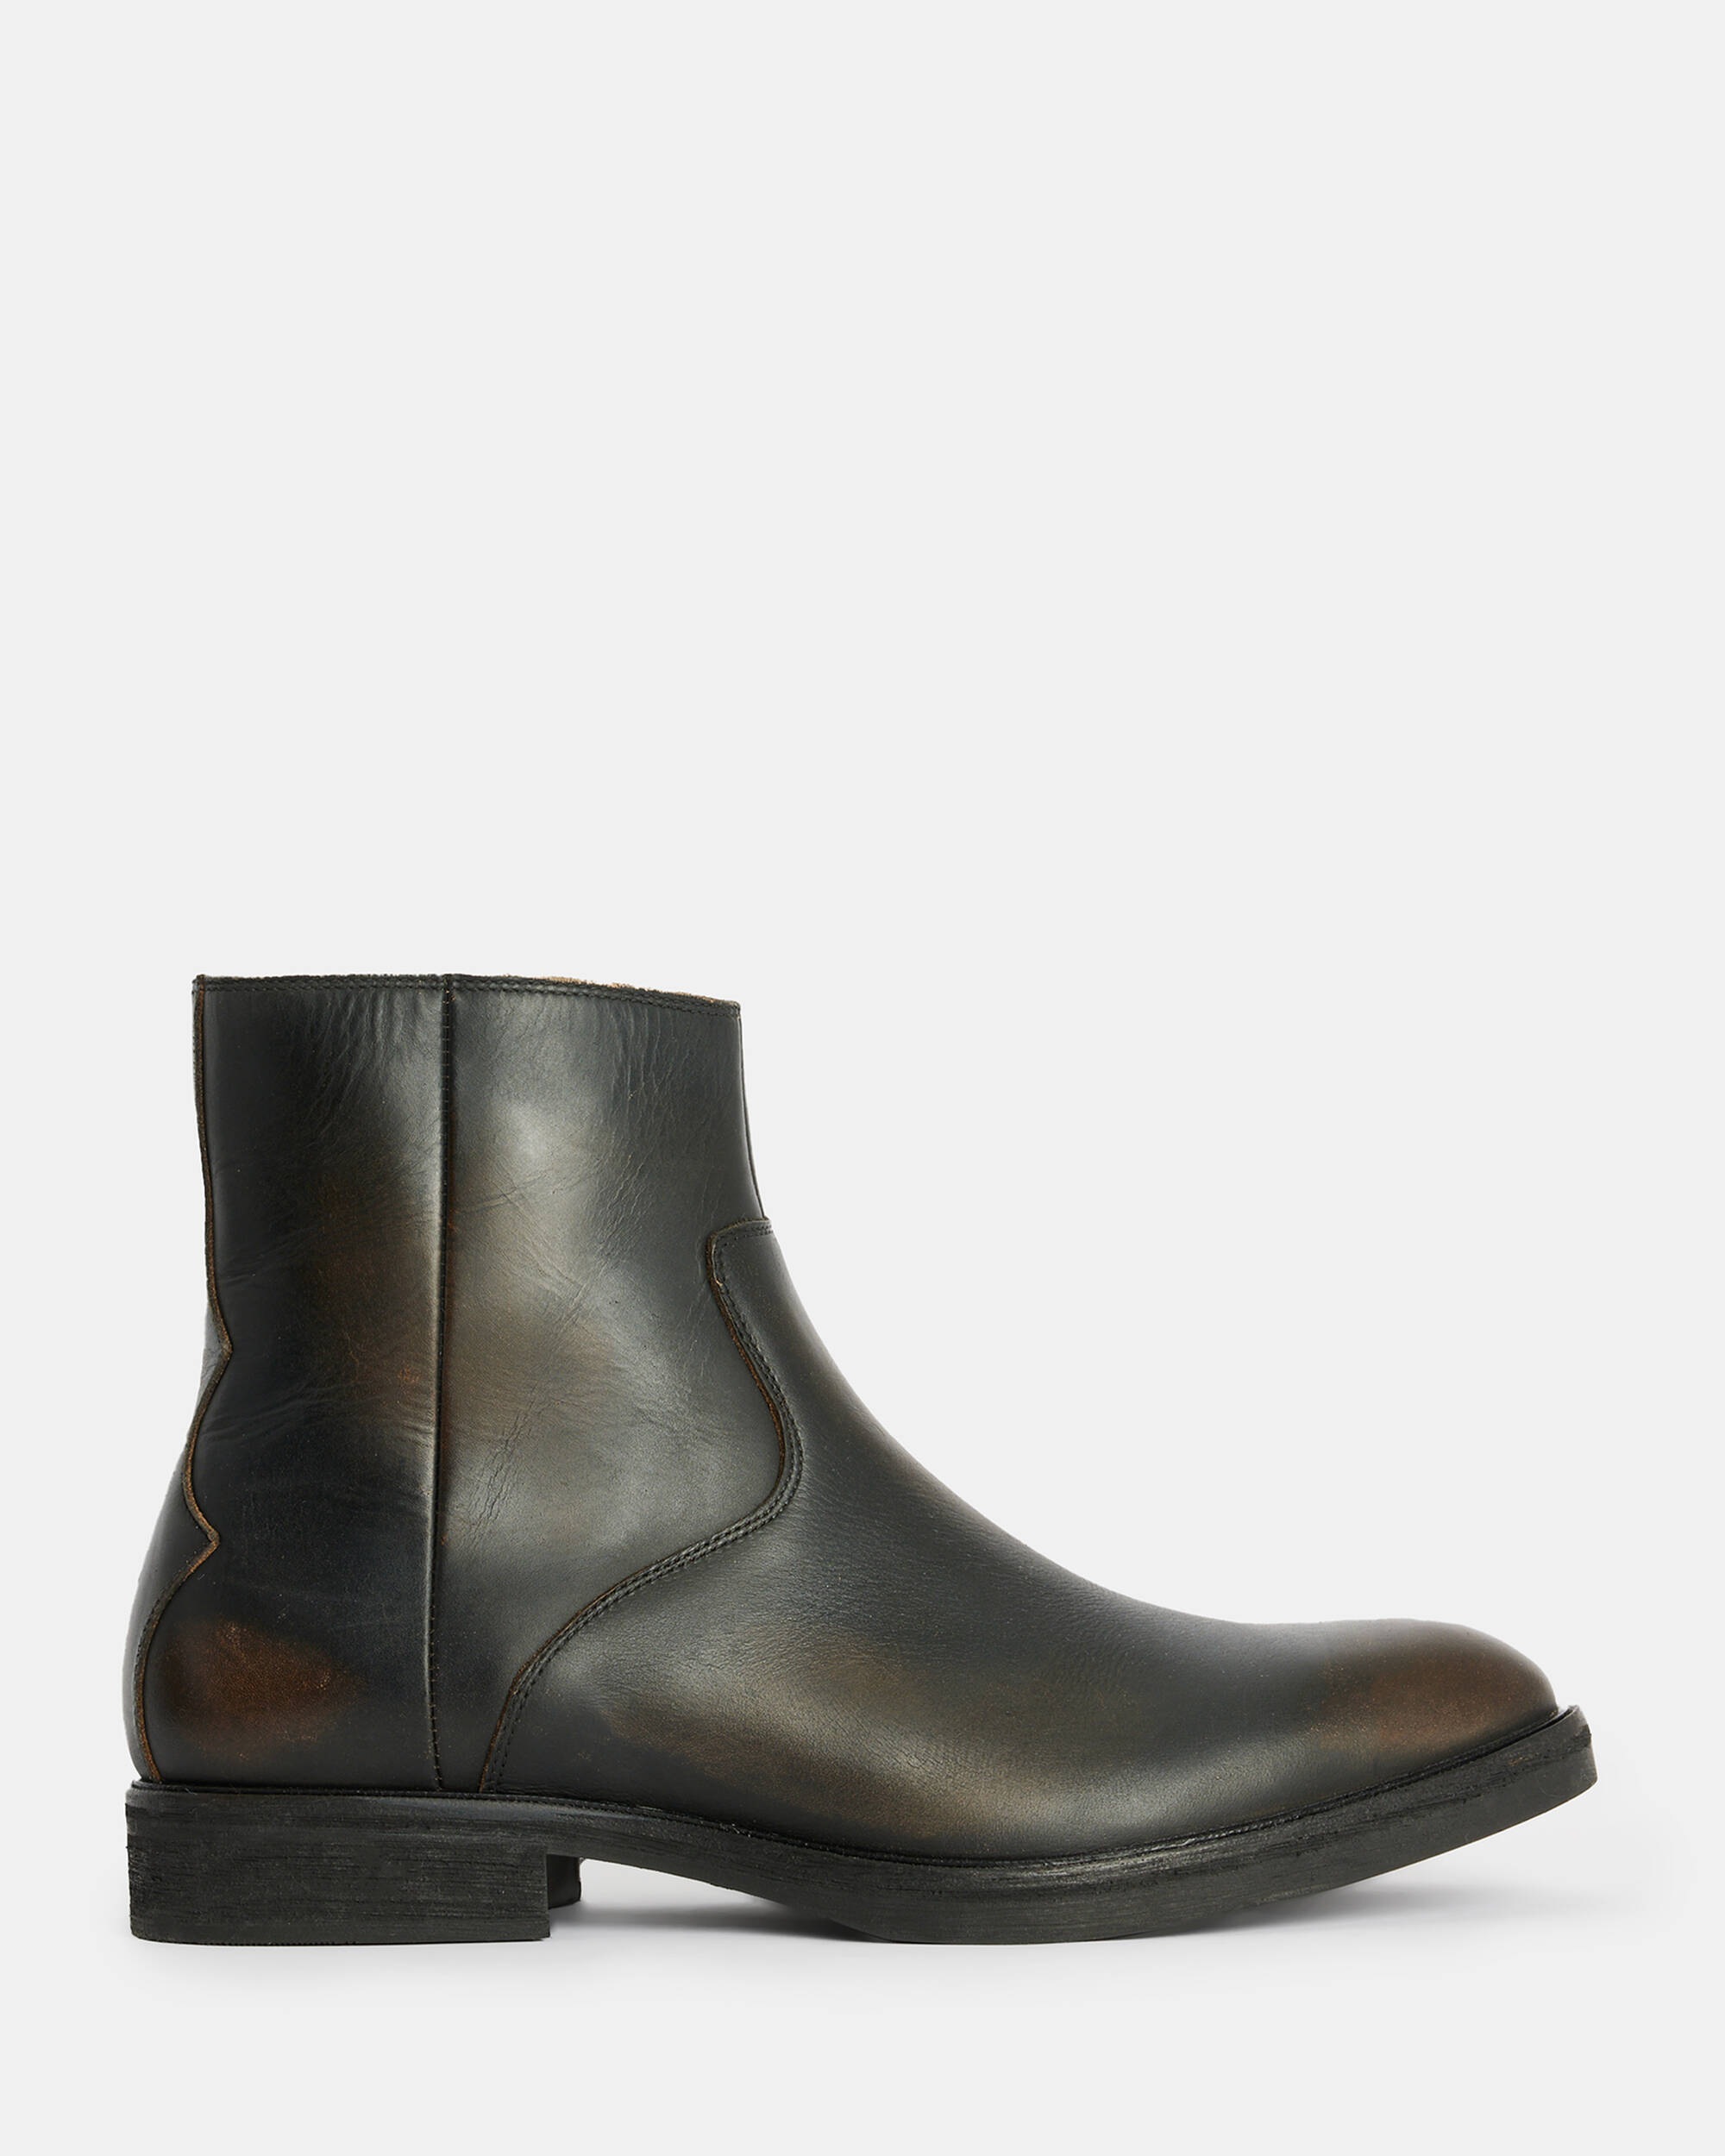 Lang Leather Zip Up Boots